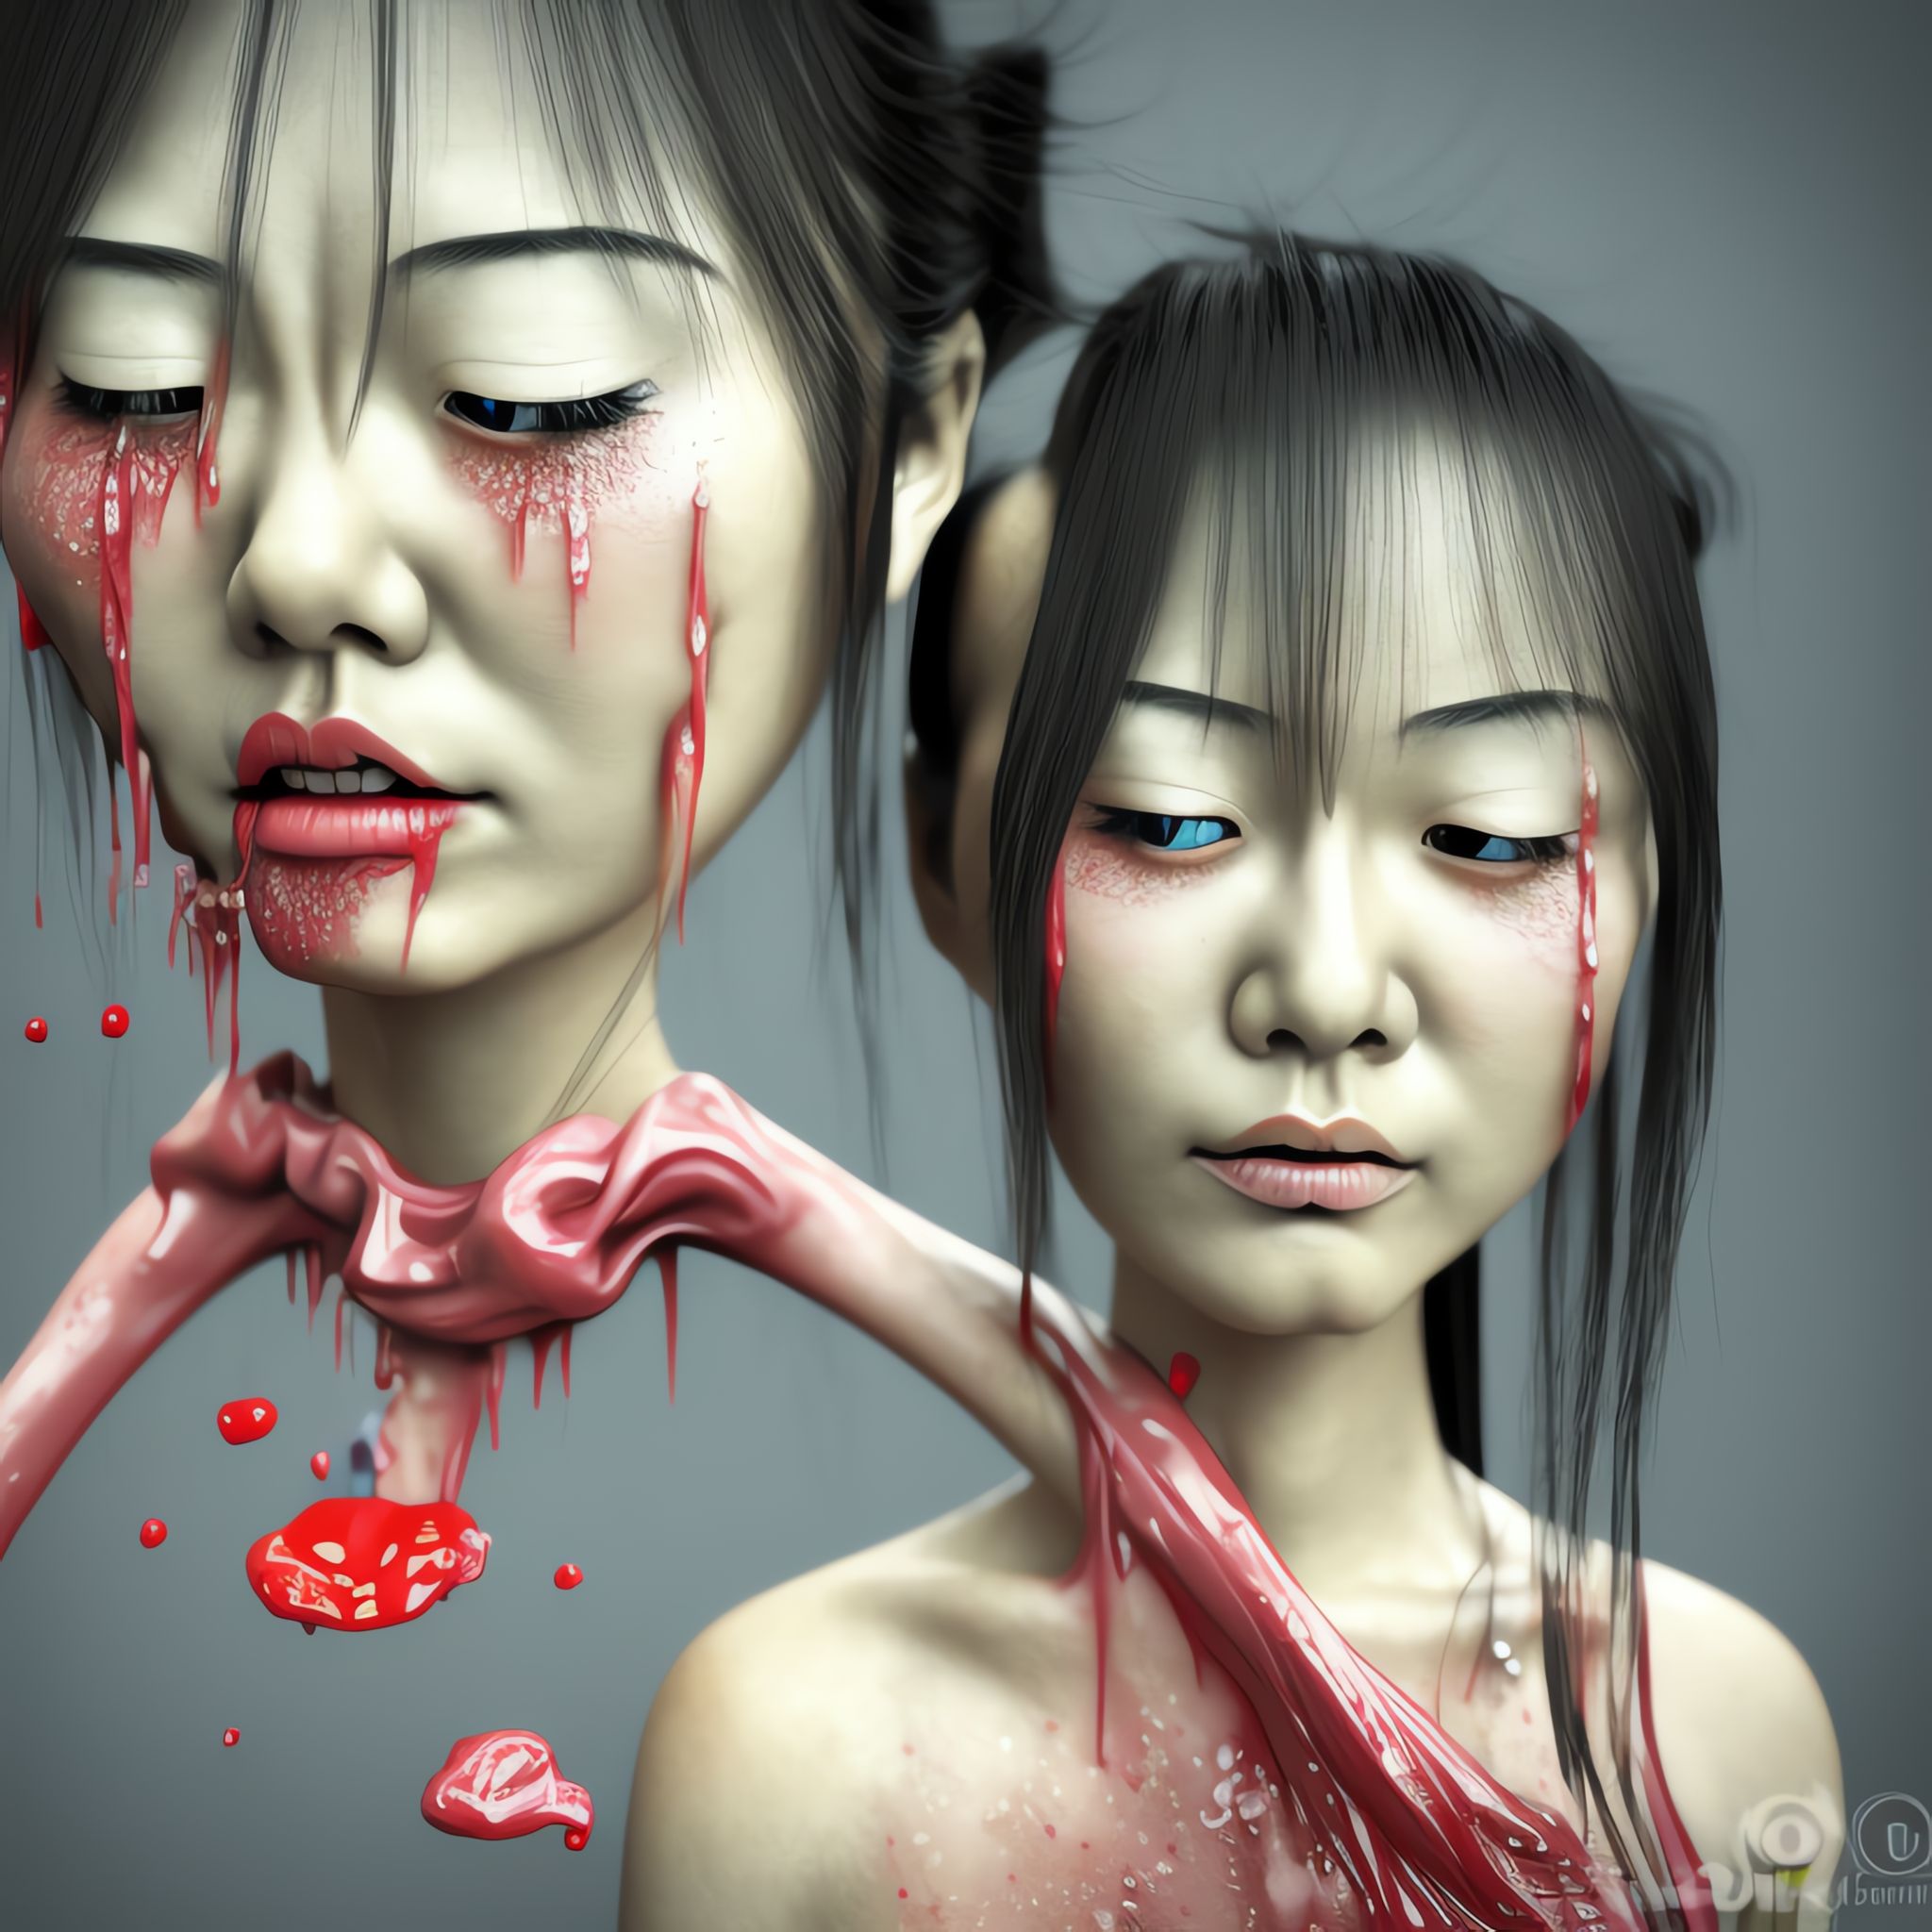 Melting-face-of-a-Japanese-girl-3d-cgi-art-lots-of-details-cute-Japanese-artwork-old-town-his-khcn